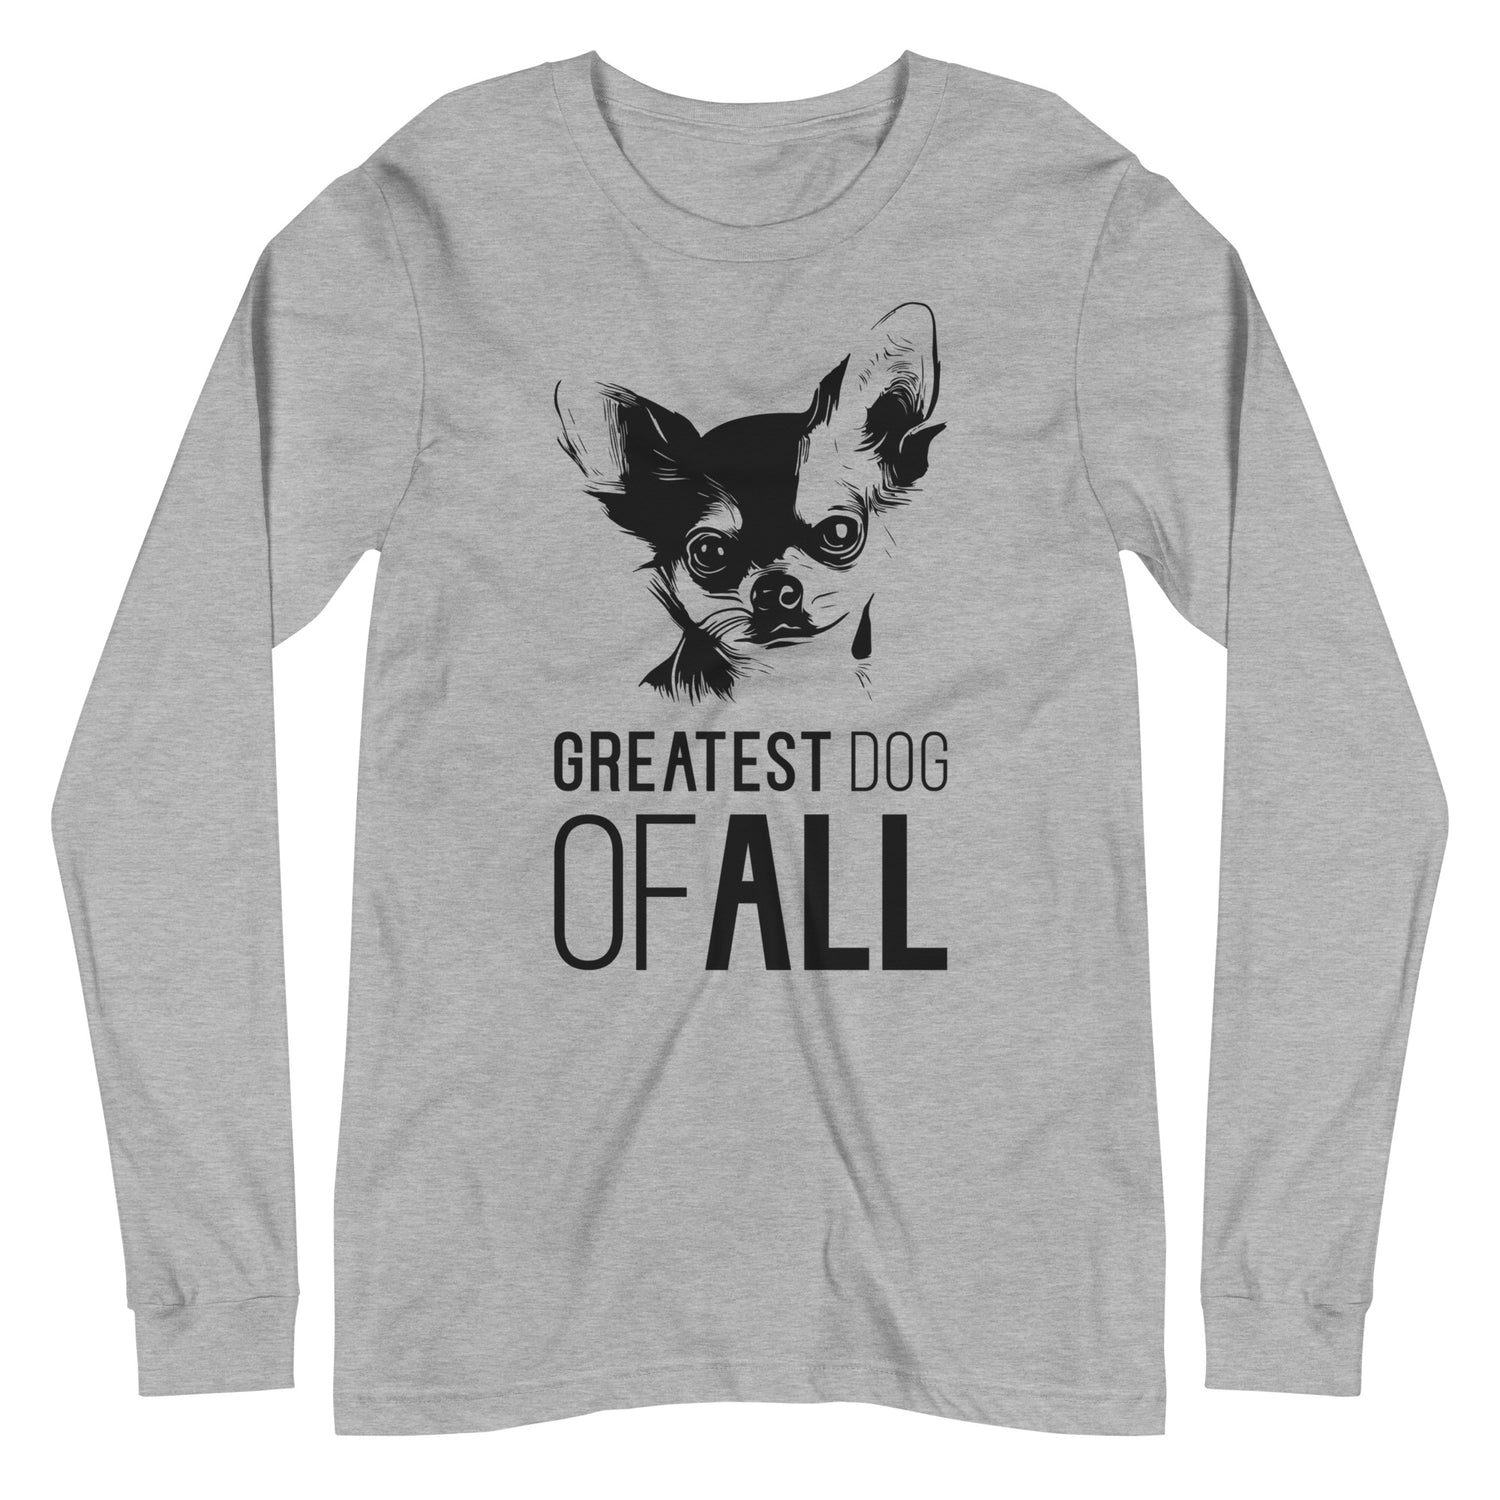 Black Chihuahua face silhouette with Greatest Dog of All caption on unisex athletic heather long sleeve t-shirt